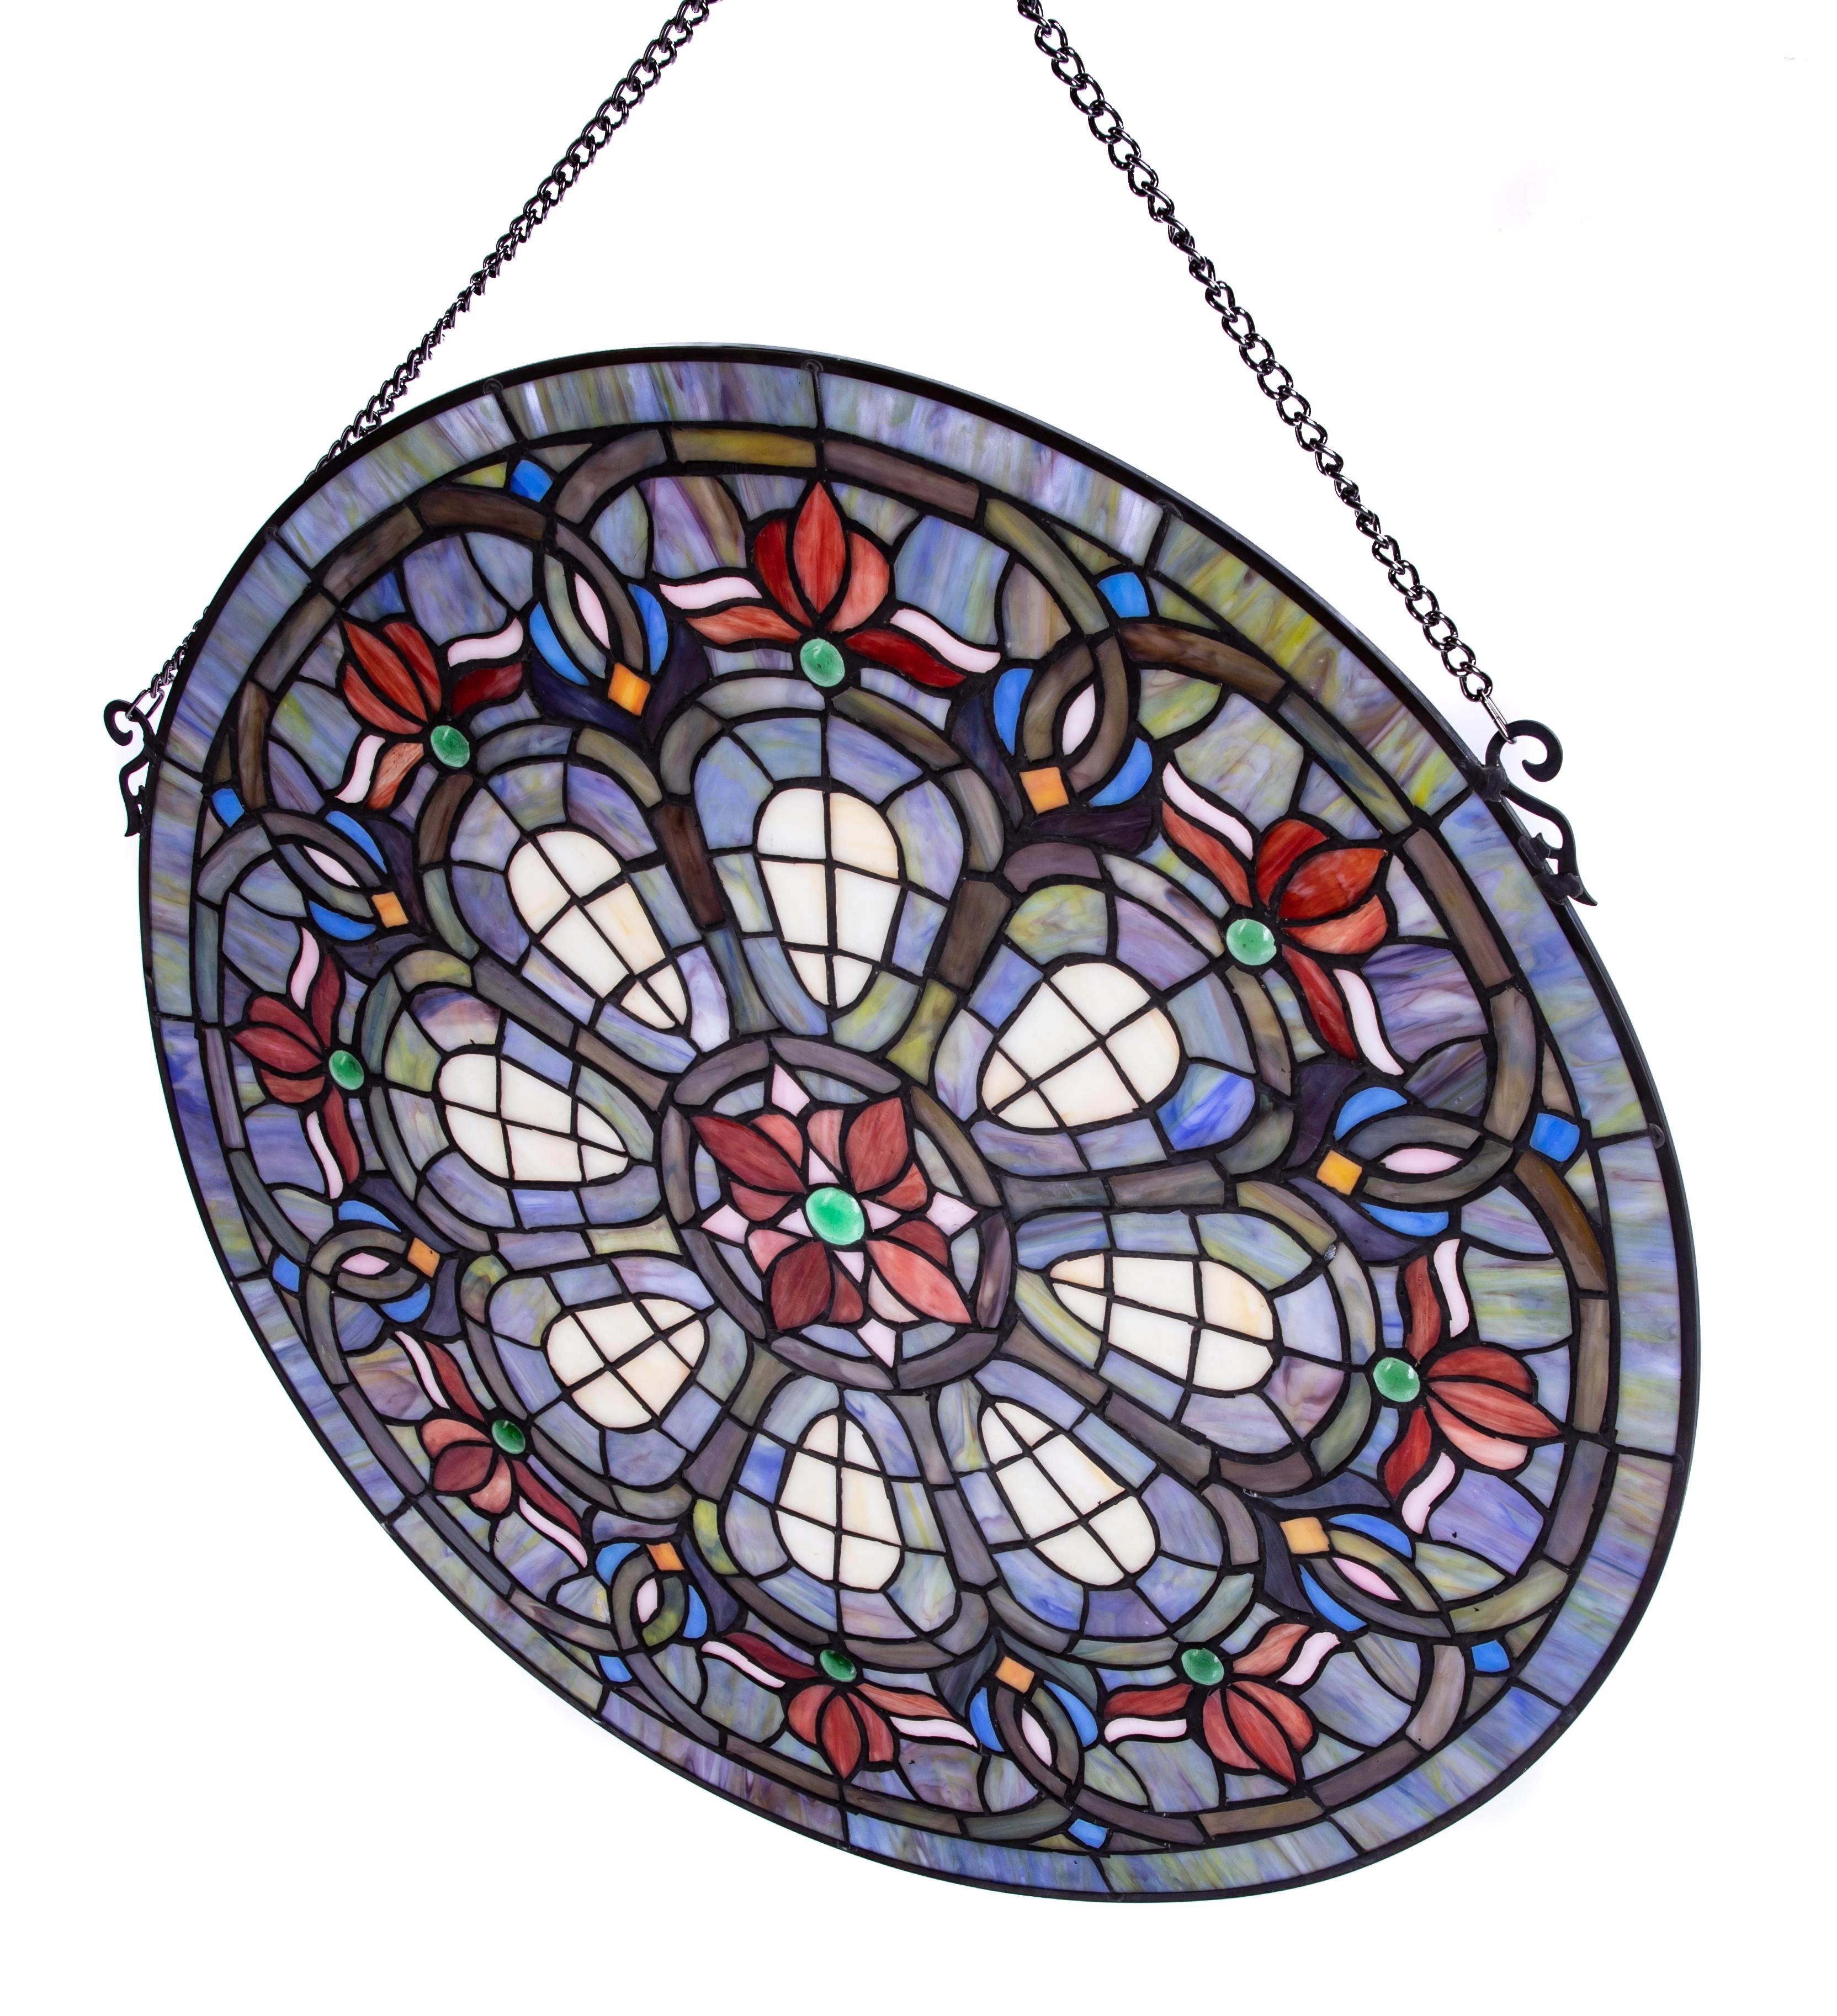 American Stained Glass Panel